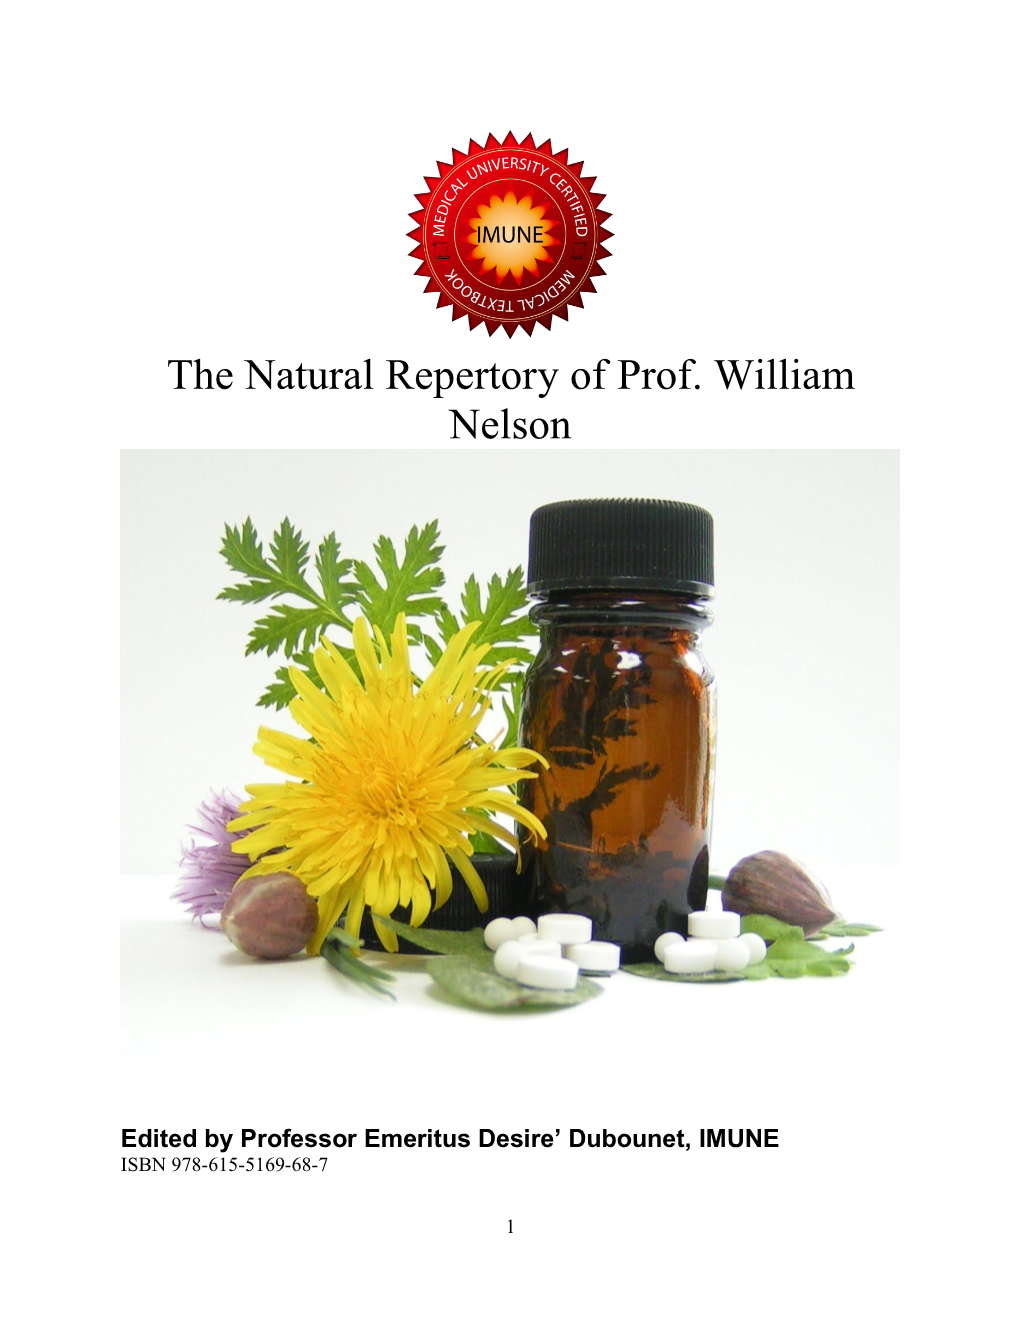 The Natural Repertory of Prof. William Nelson